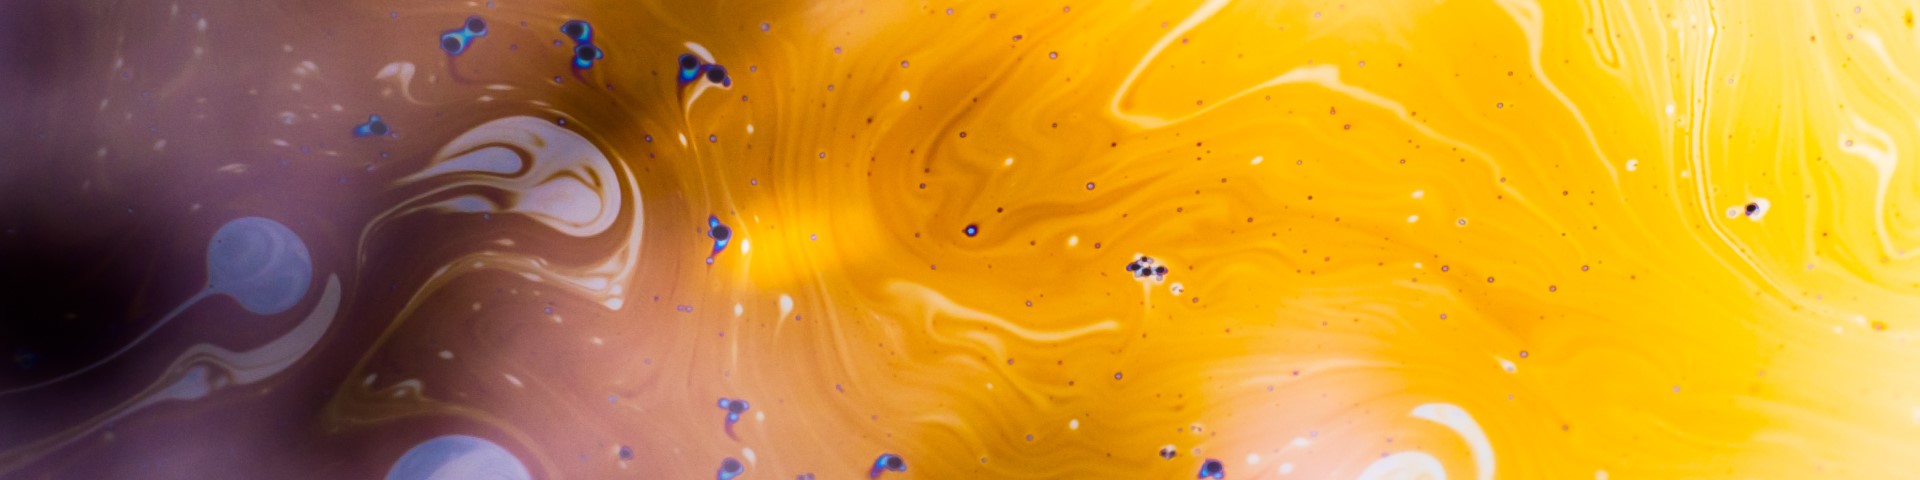 Oil with bubbles